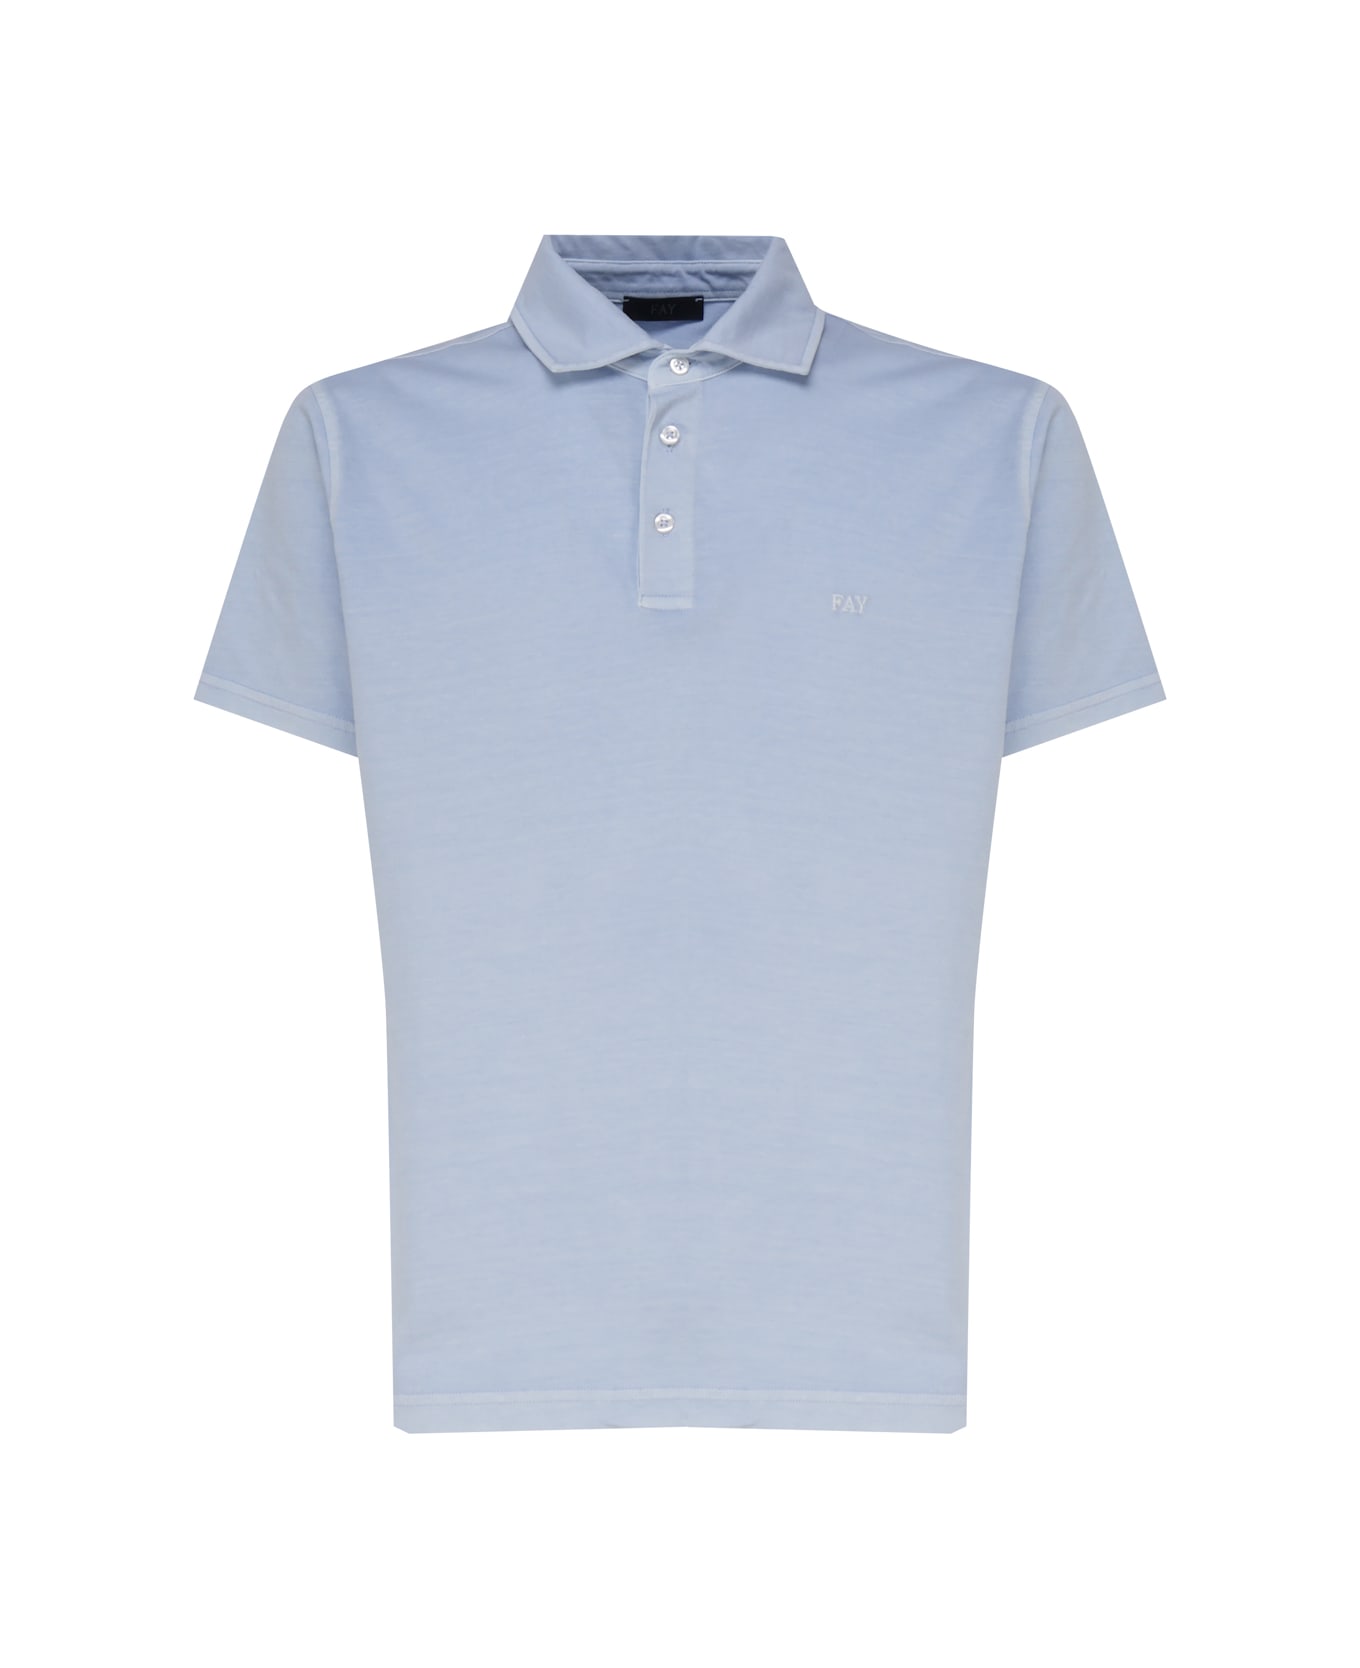 Fay Polo T-shirt In Cotton - Light blue